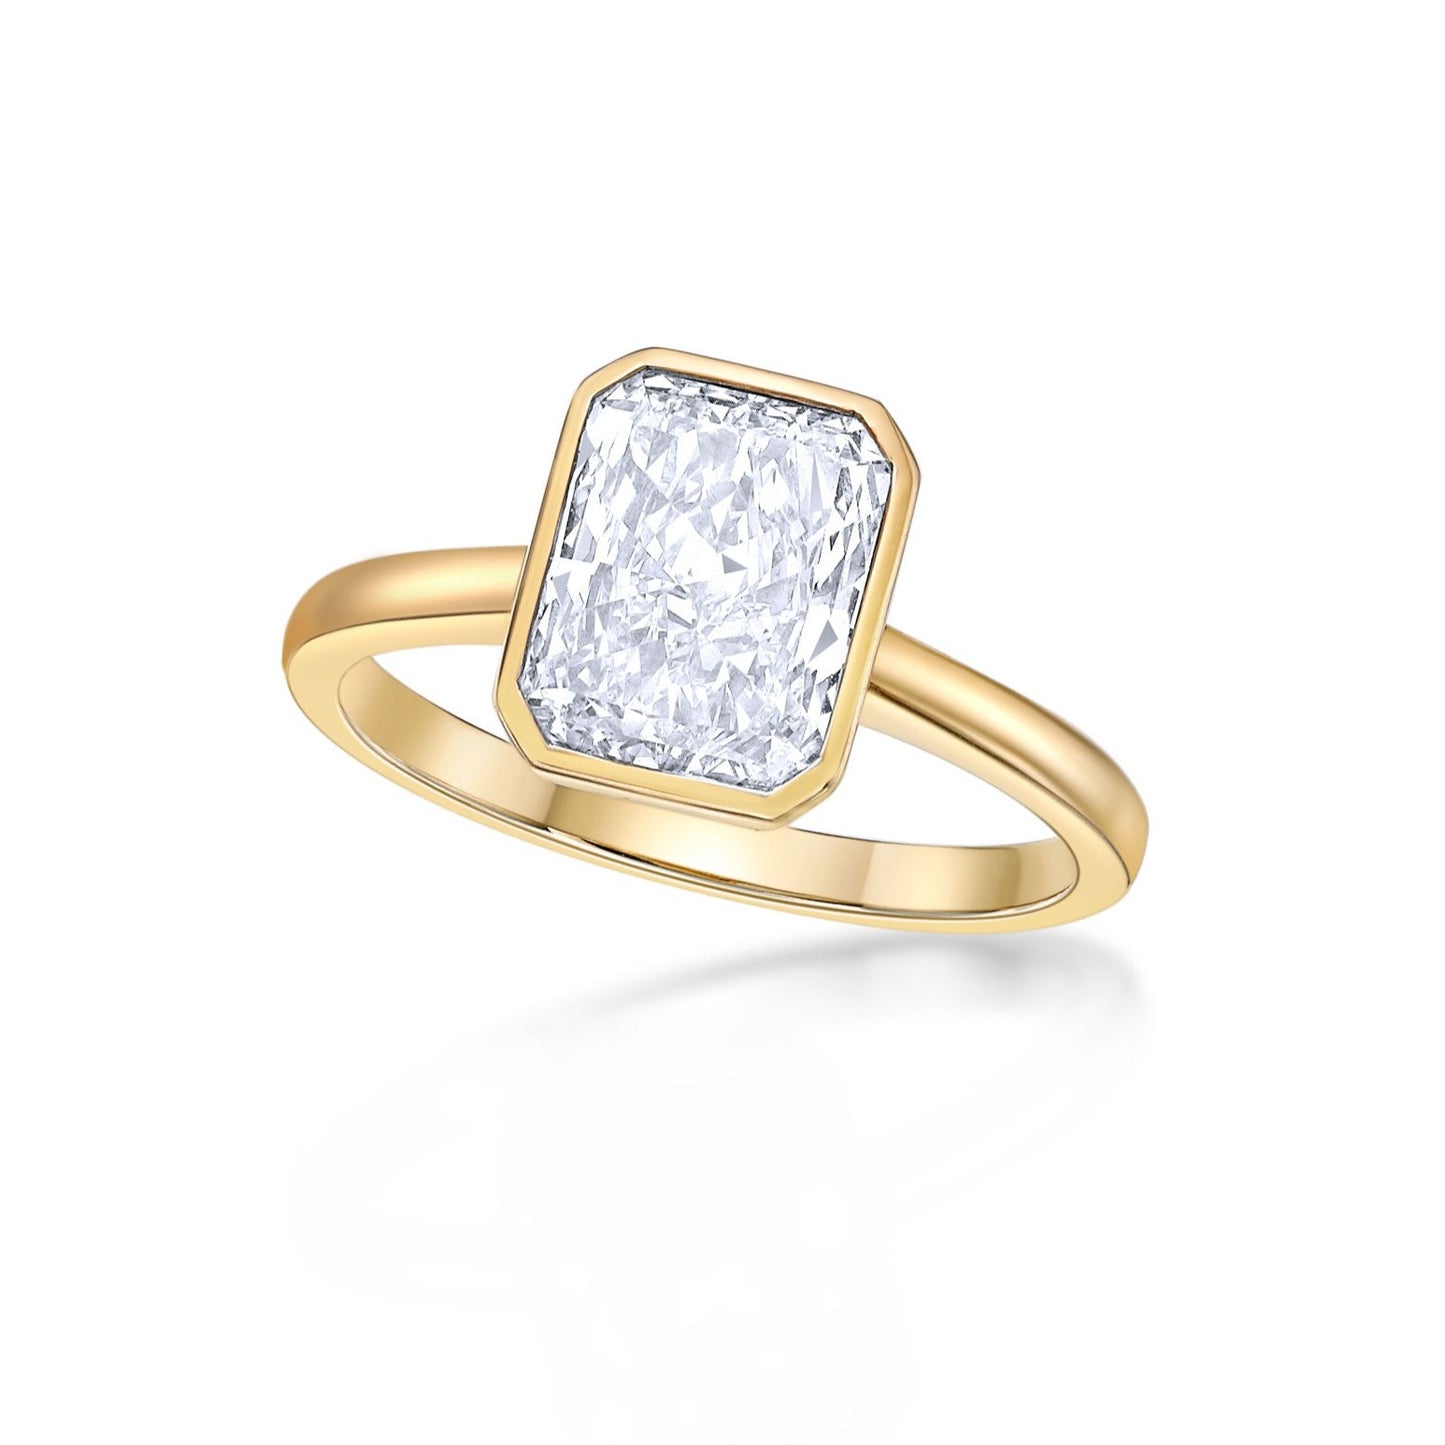 2.21ct Radiant cut diamond in a contemporary 18K Yellow Gold Bezel Solitaire setting